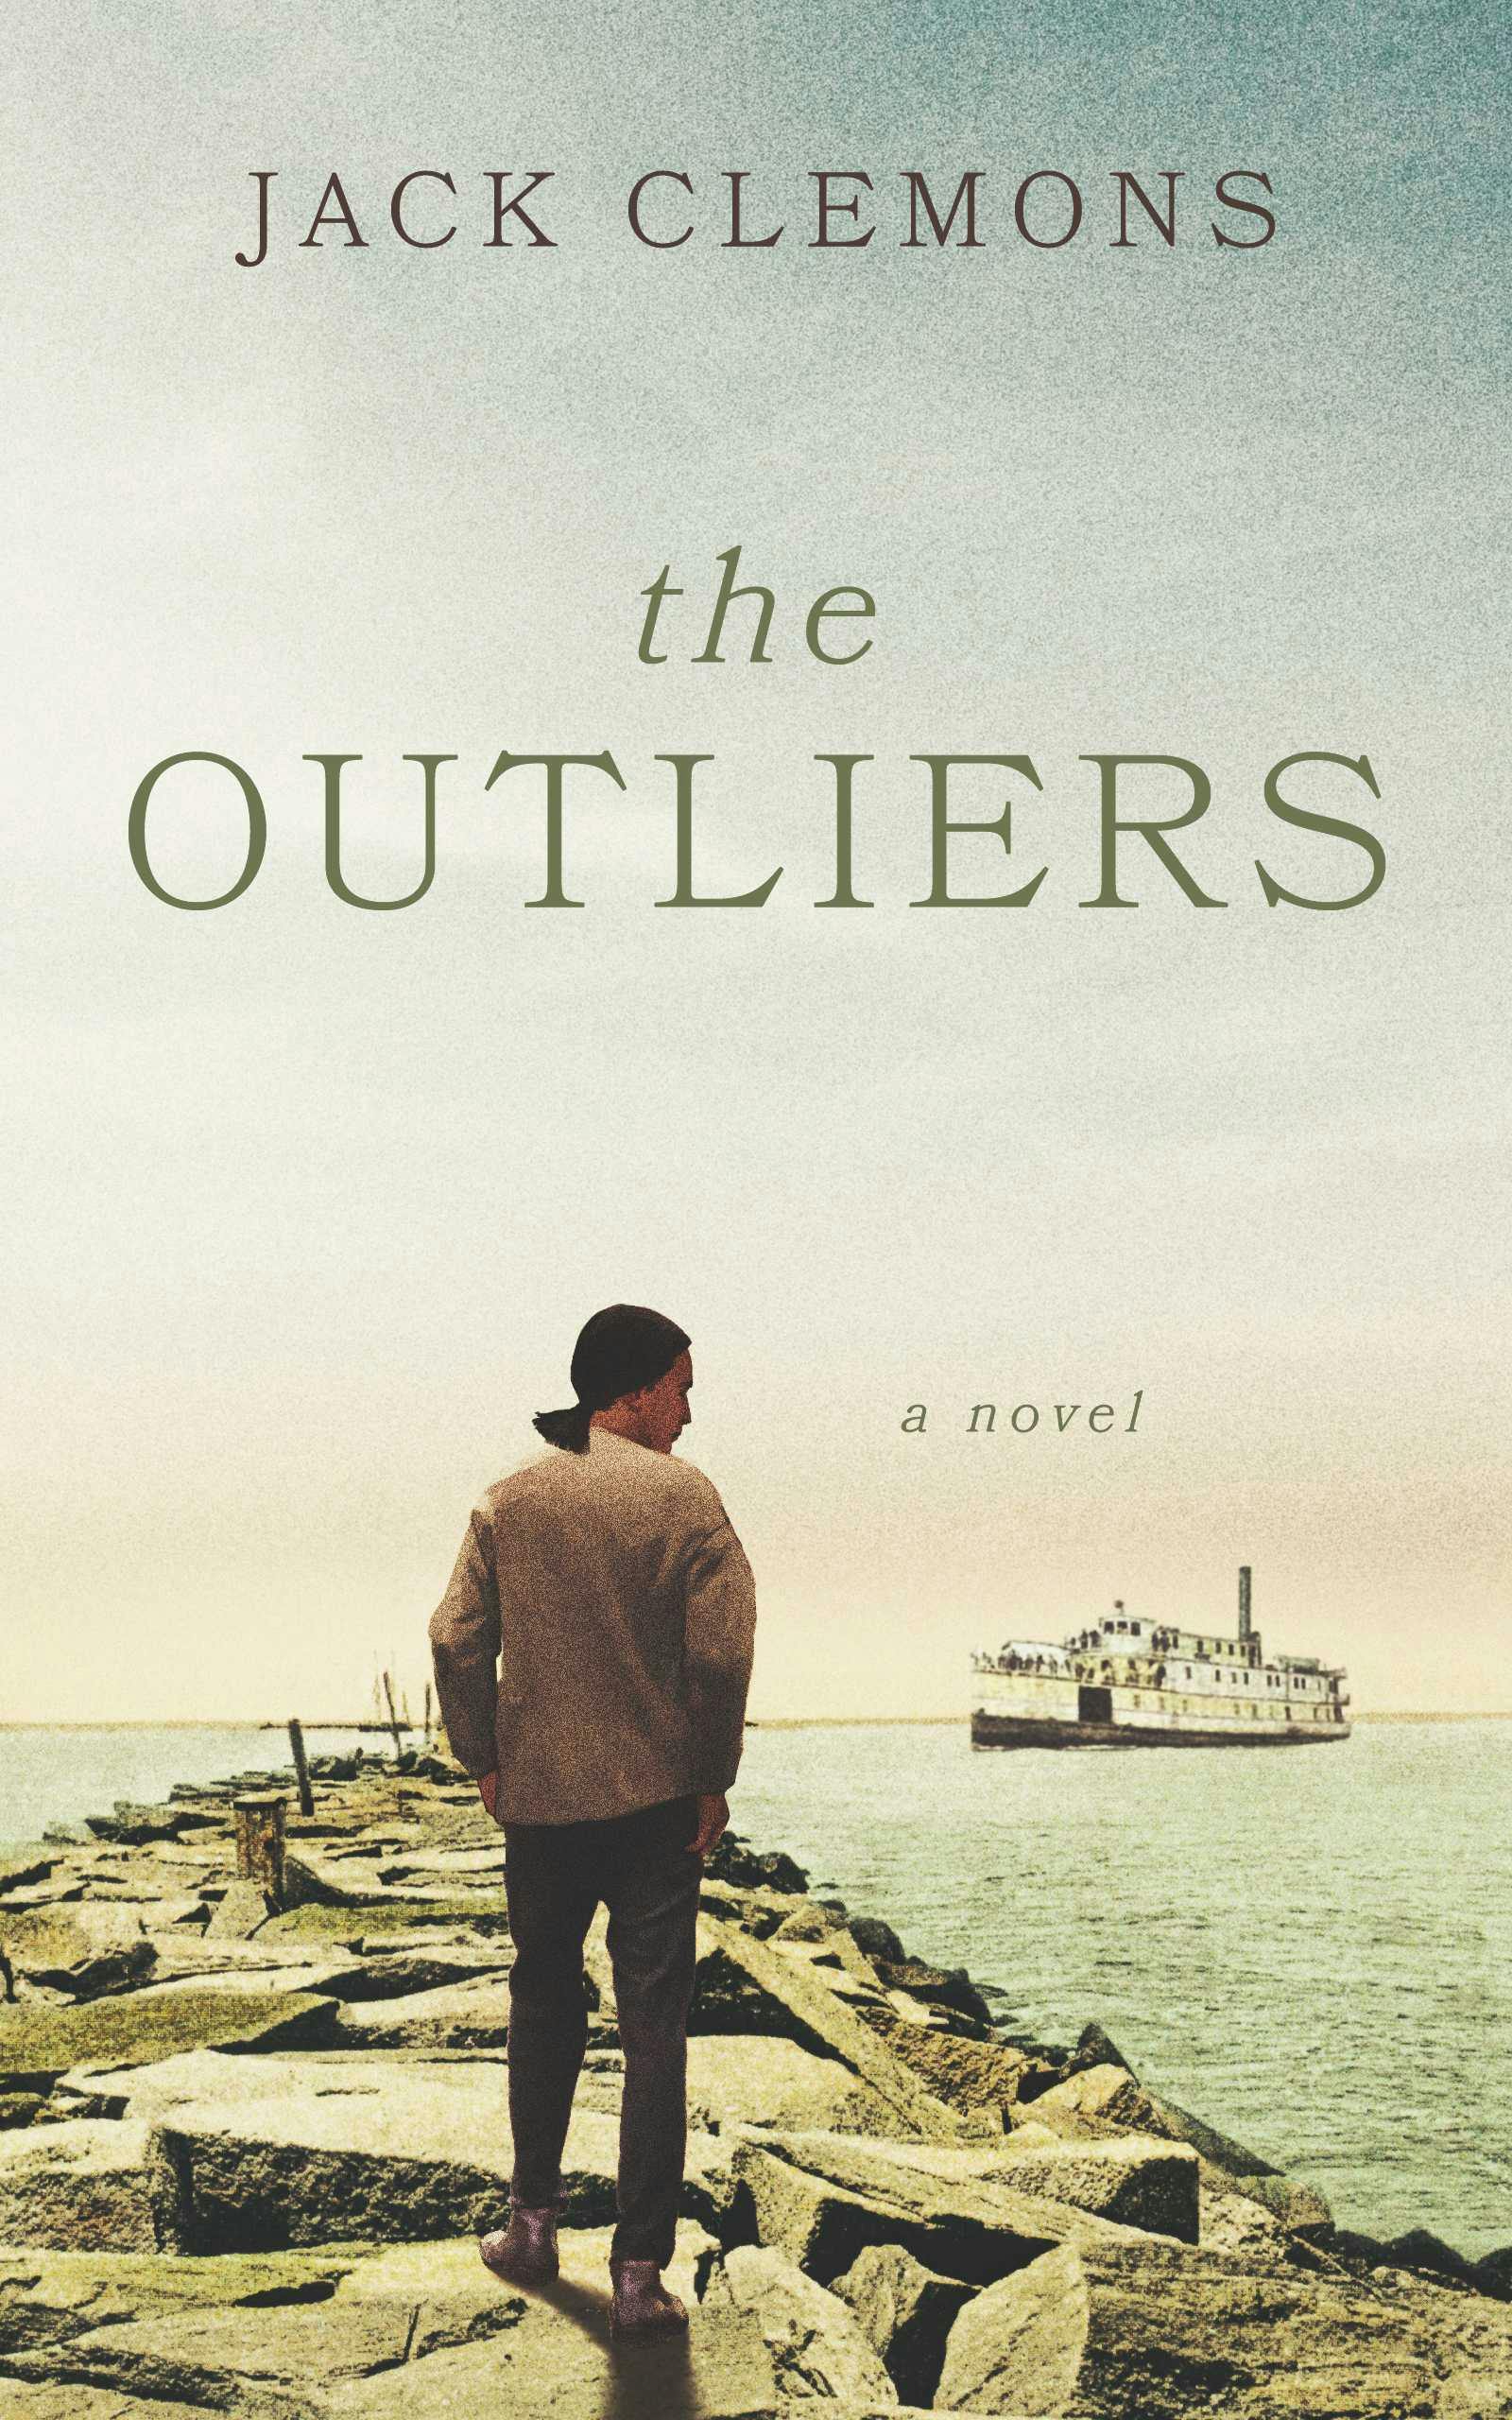 The Outliers - Jack Clemons